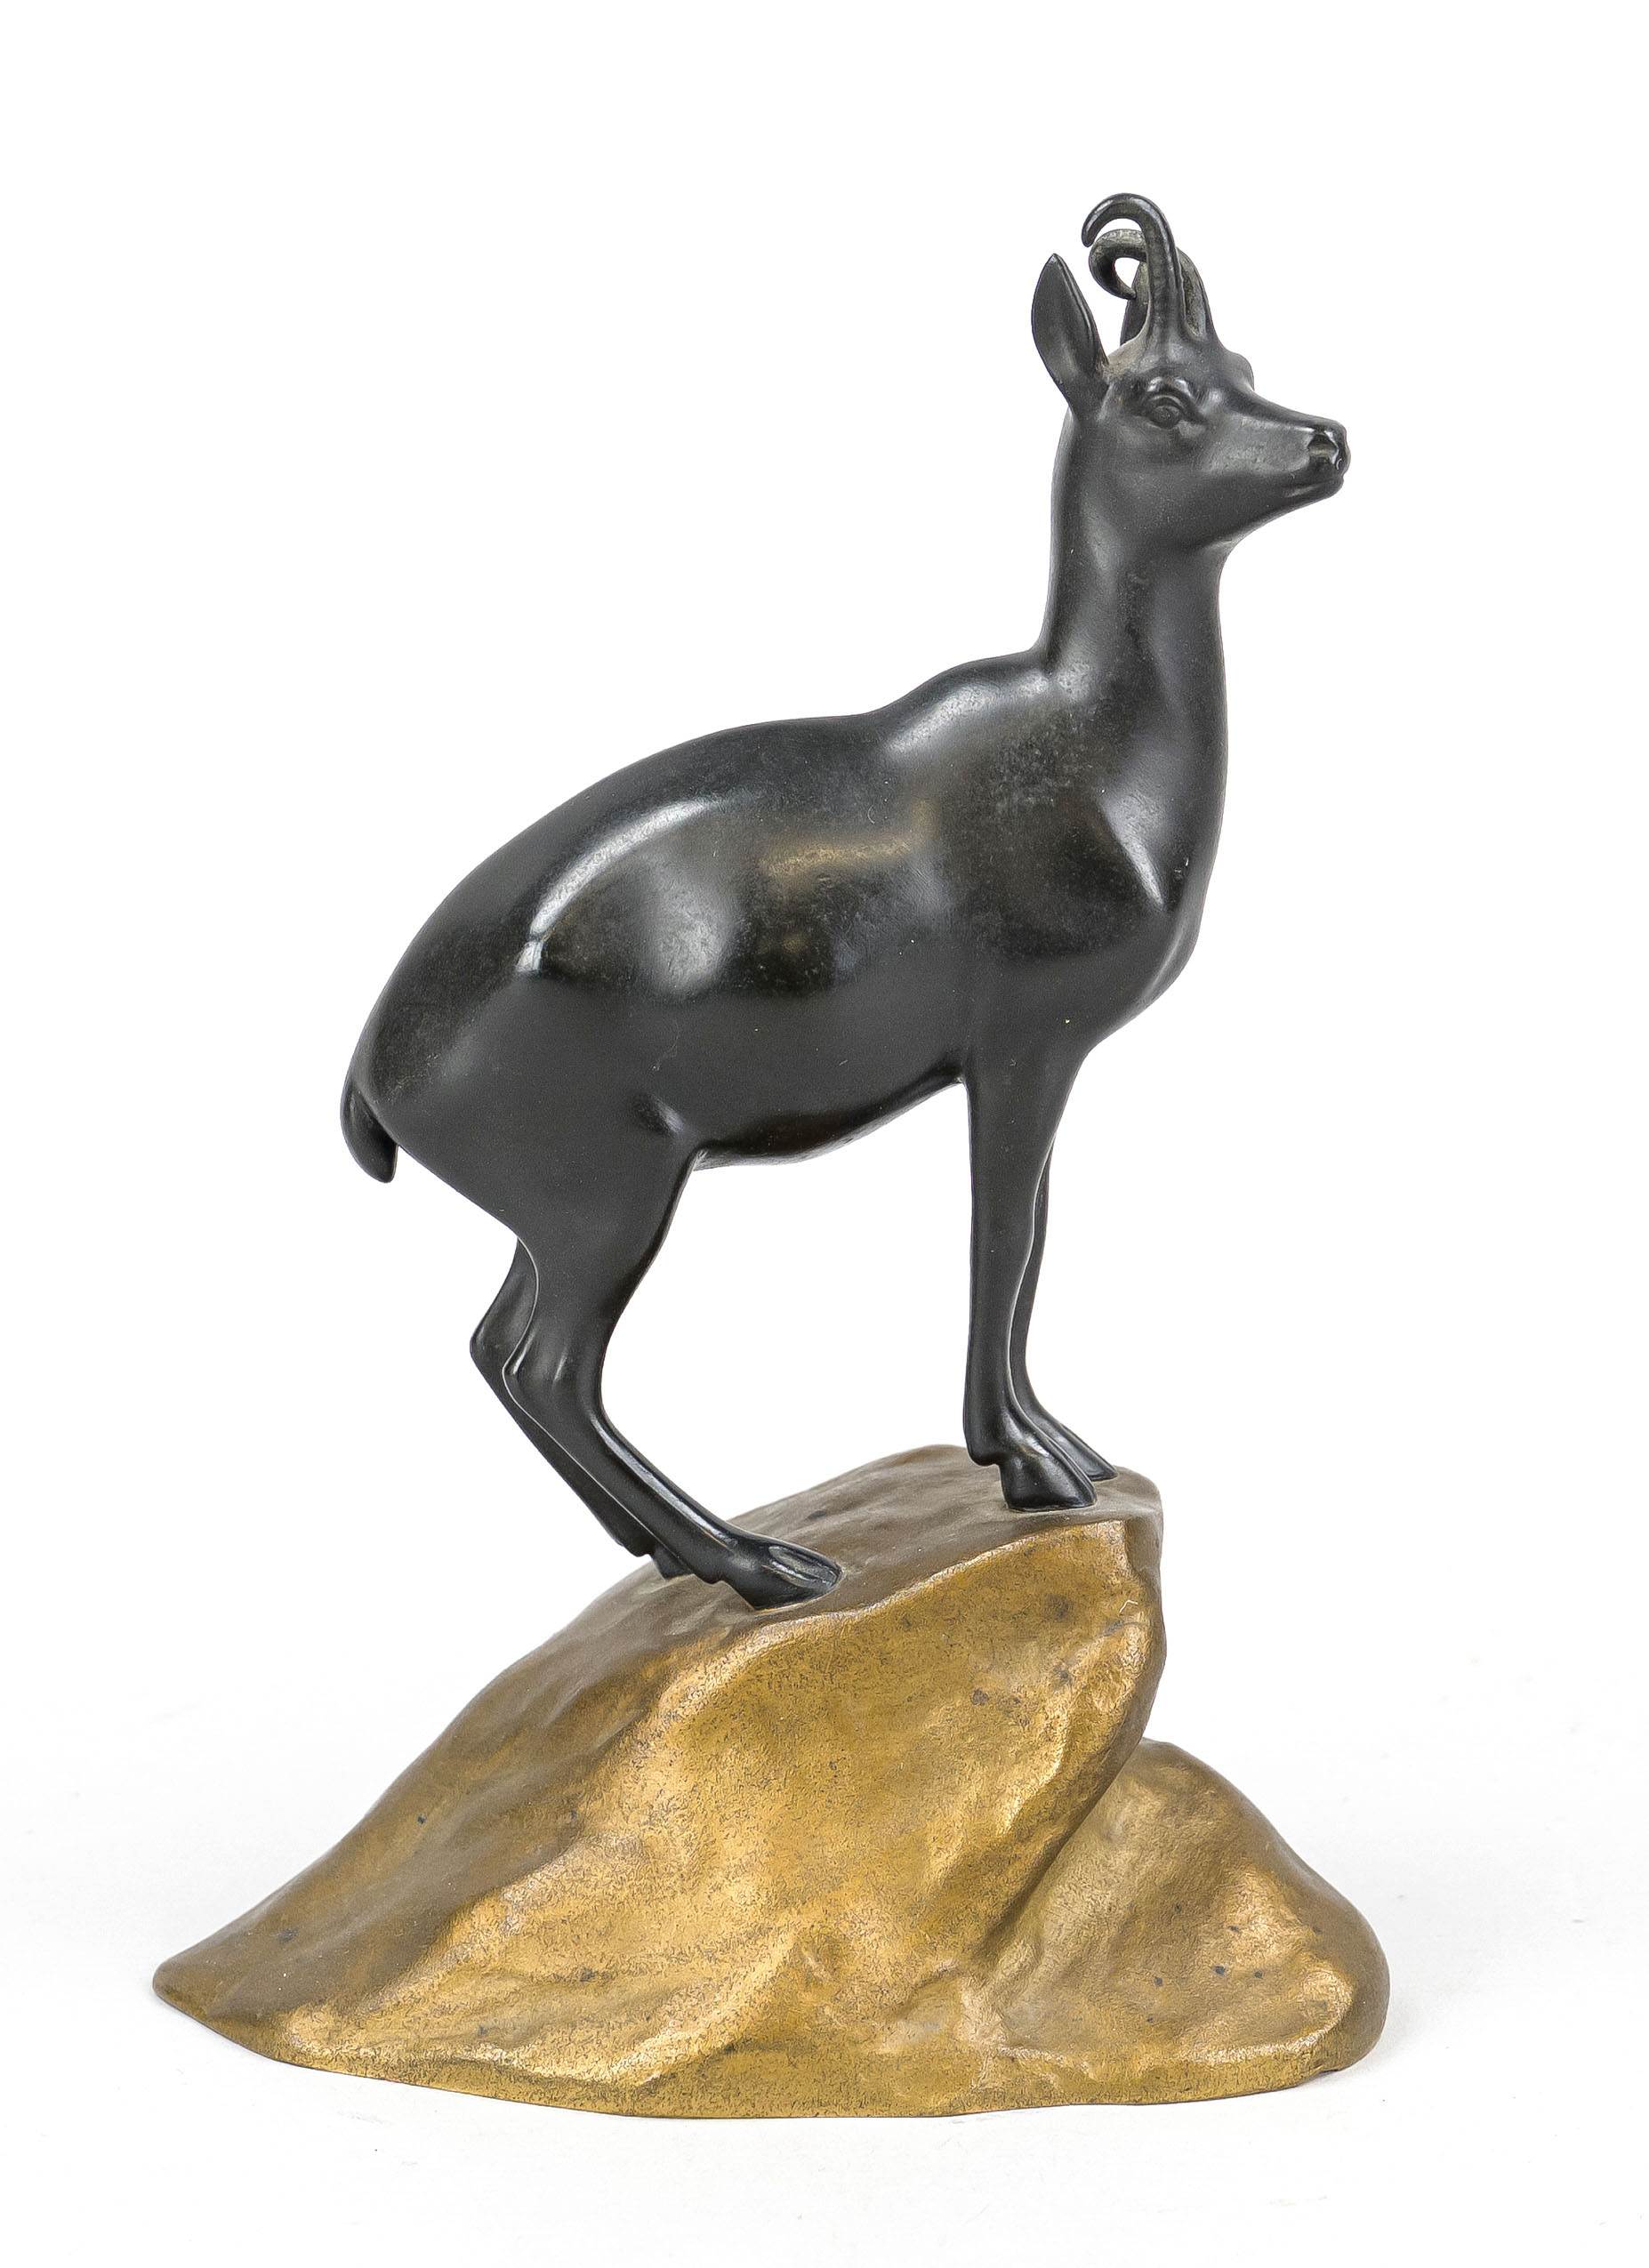 Hans Müller (1873-1937), Austrian sculptor, chamois buck, gold and black patinated bronze, signed on